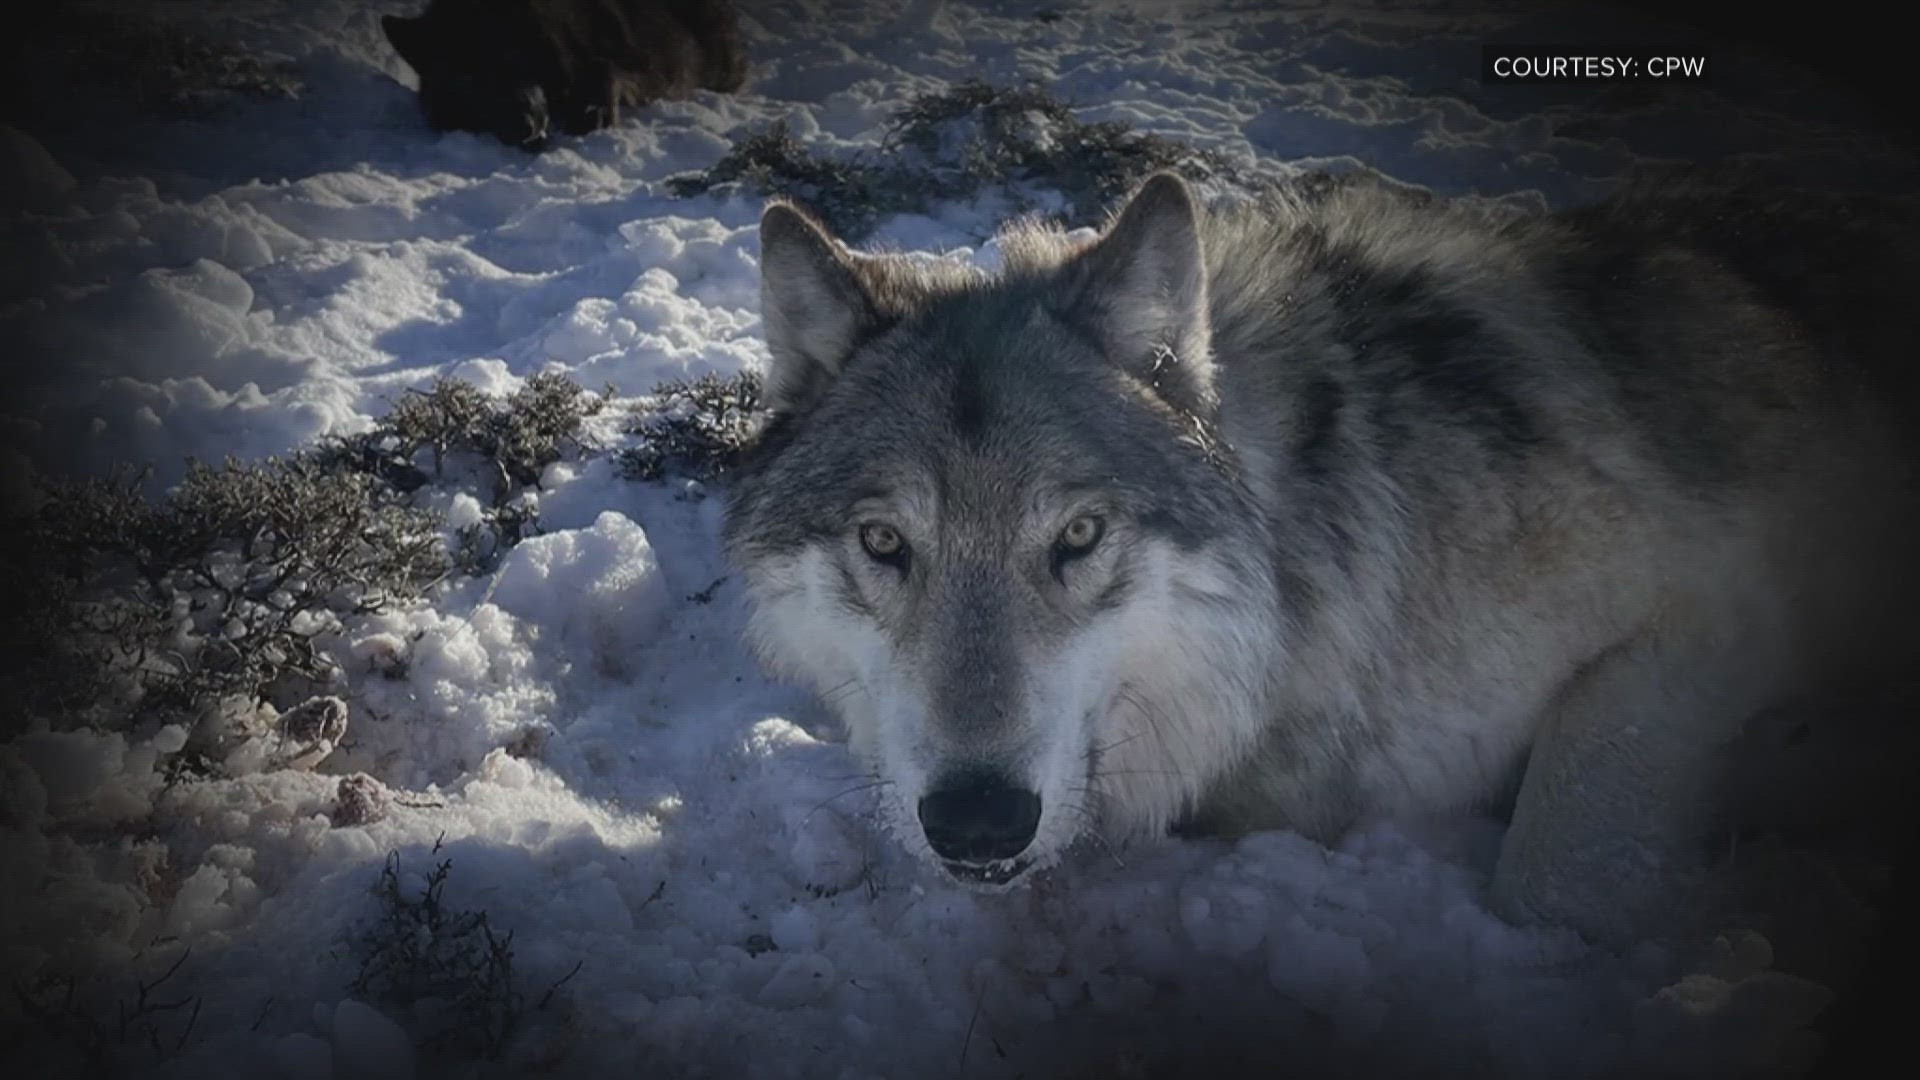 Colorado Parks and Wildlife plans to reintroduce wolves before the end of the year, but 9NEWS confirms Idaho and Wyoming won't give wolves to the state.